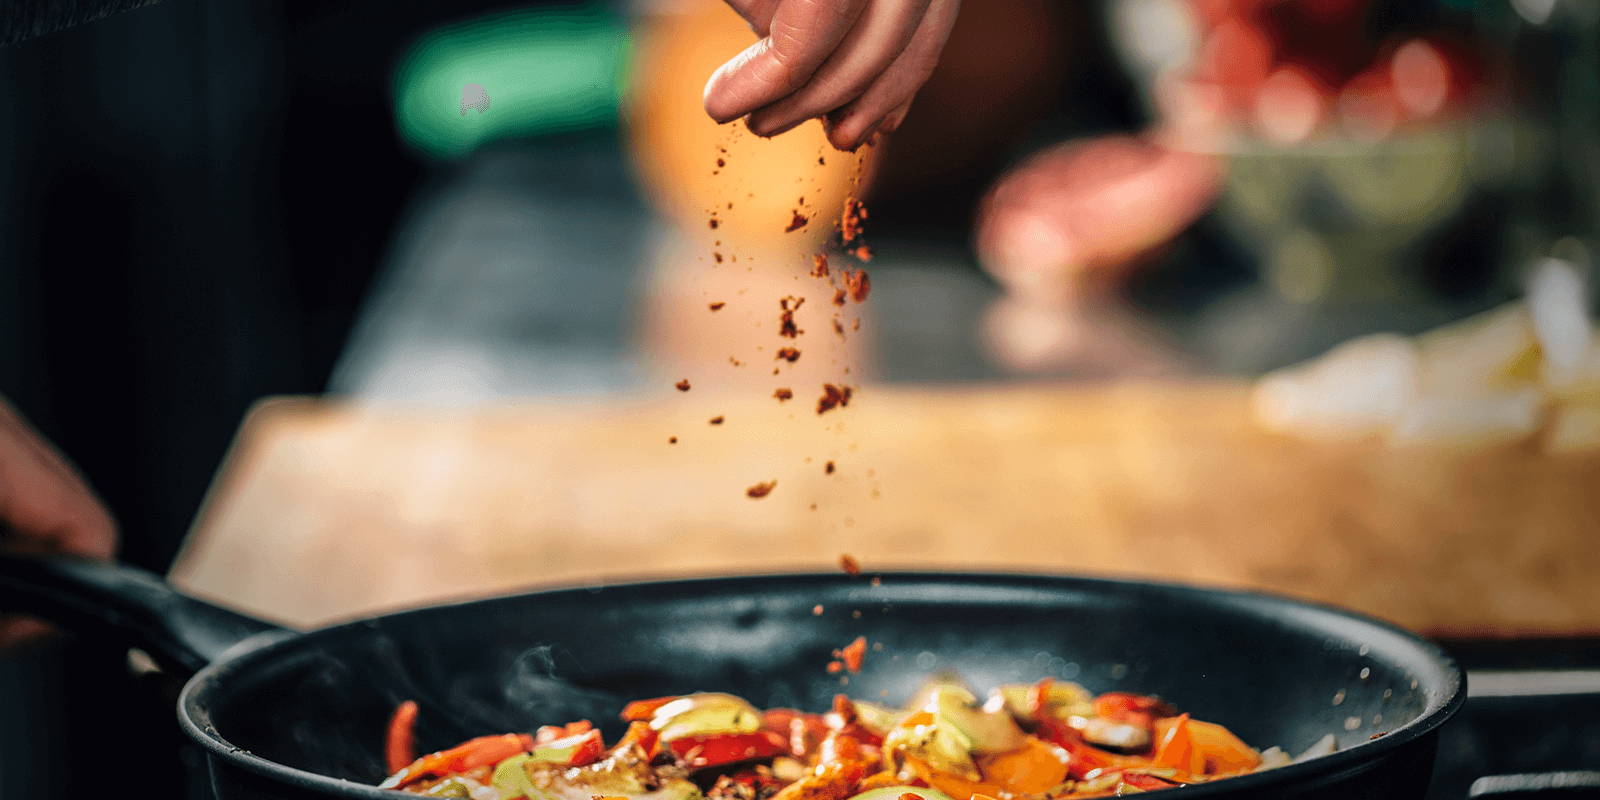 Person sprinkling spices into a sizzling pan.